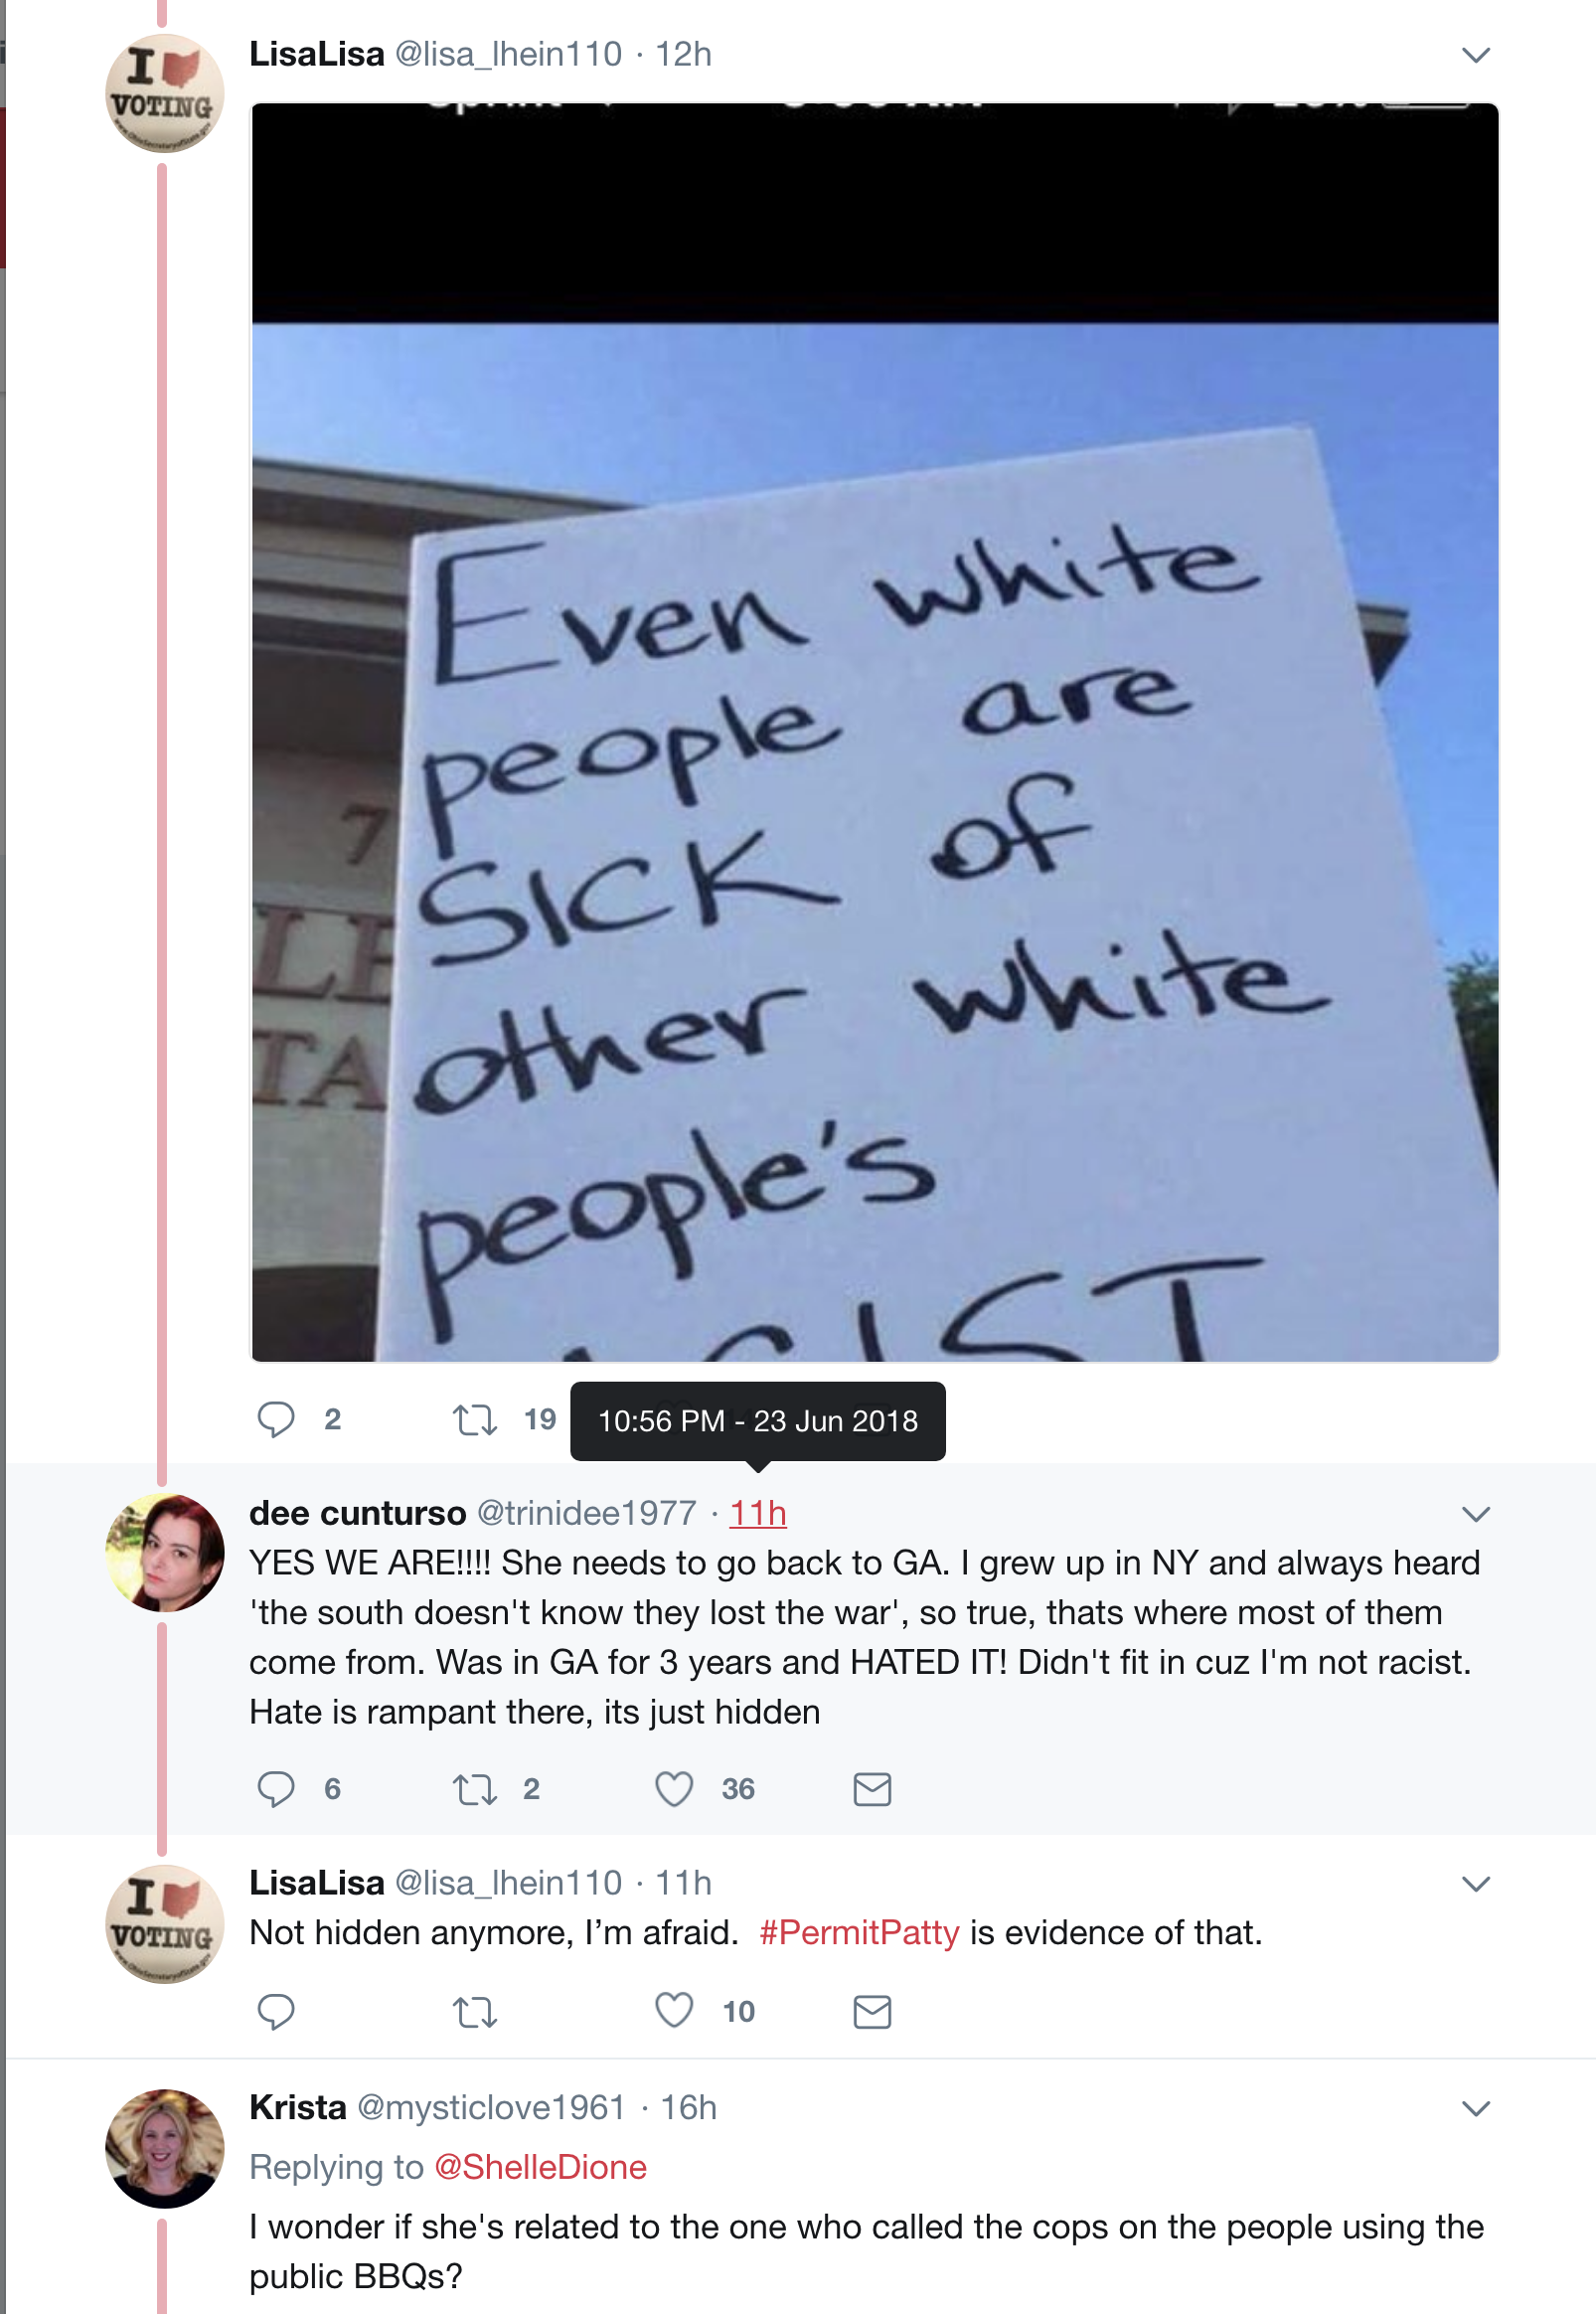 Screen-Shot-2018-06-24-at-10.26.50-AM Companies Revolt Against Permit Patty's Business For Calling 911 On Little Black Girl Politics Racism Social Media Top Stories 